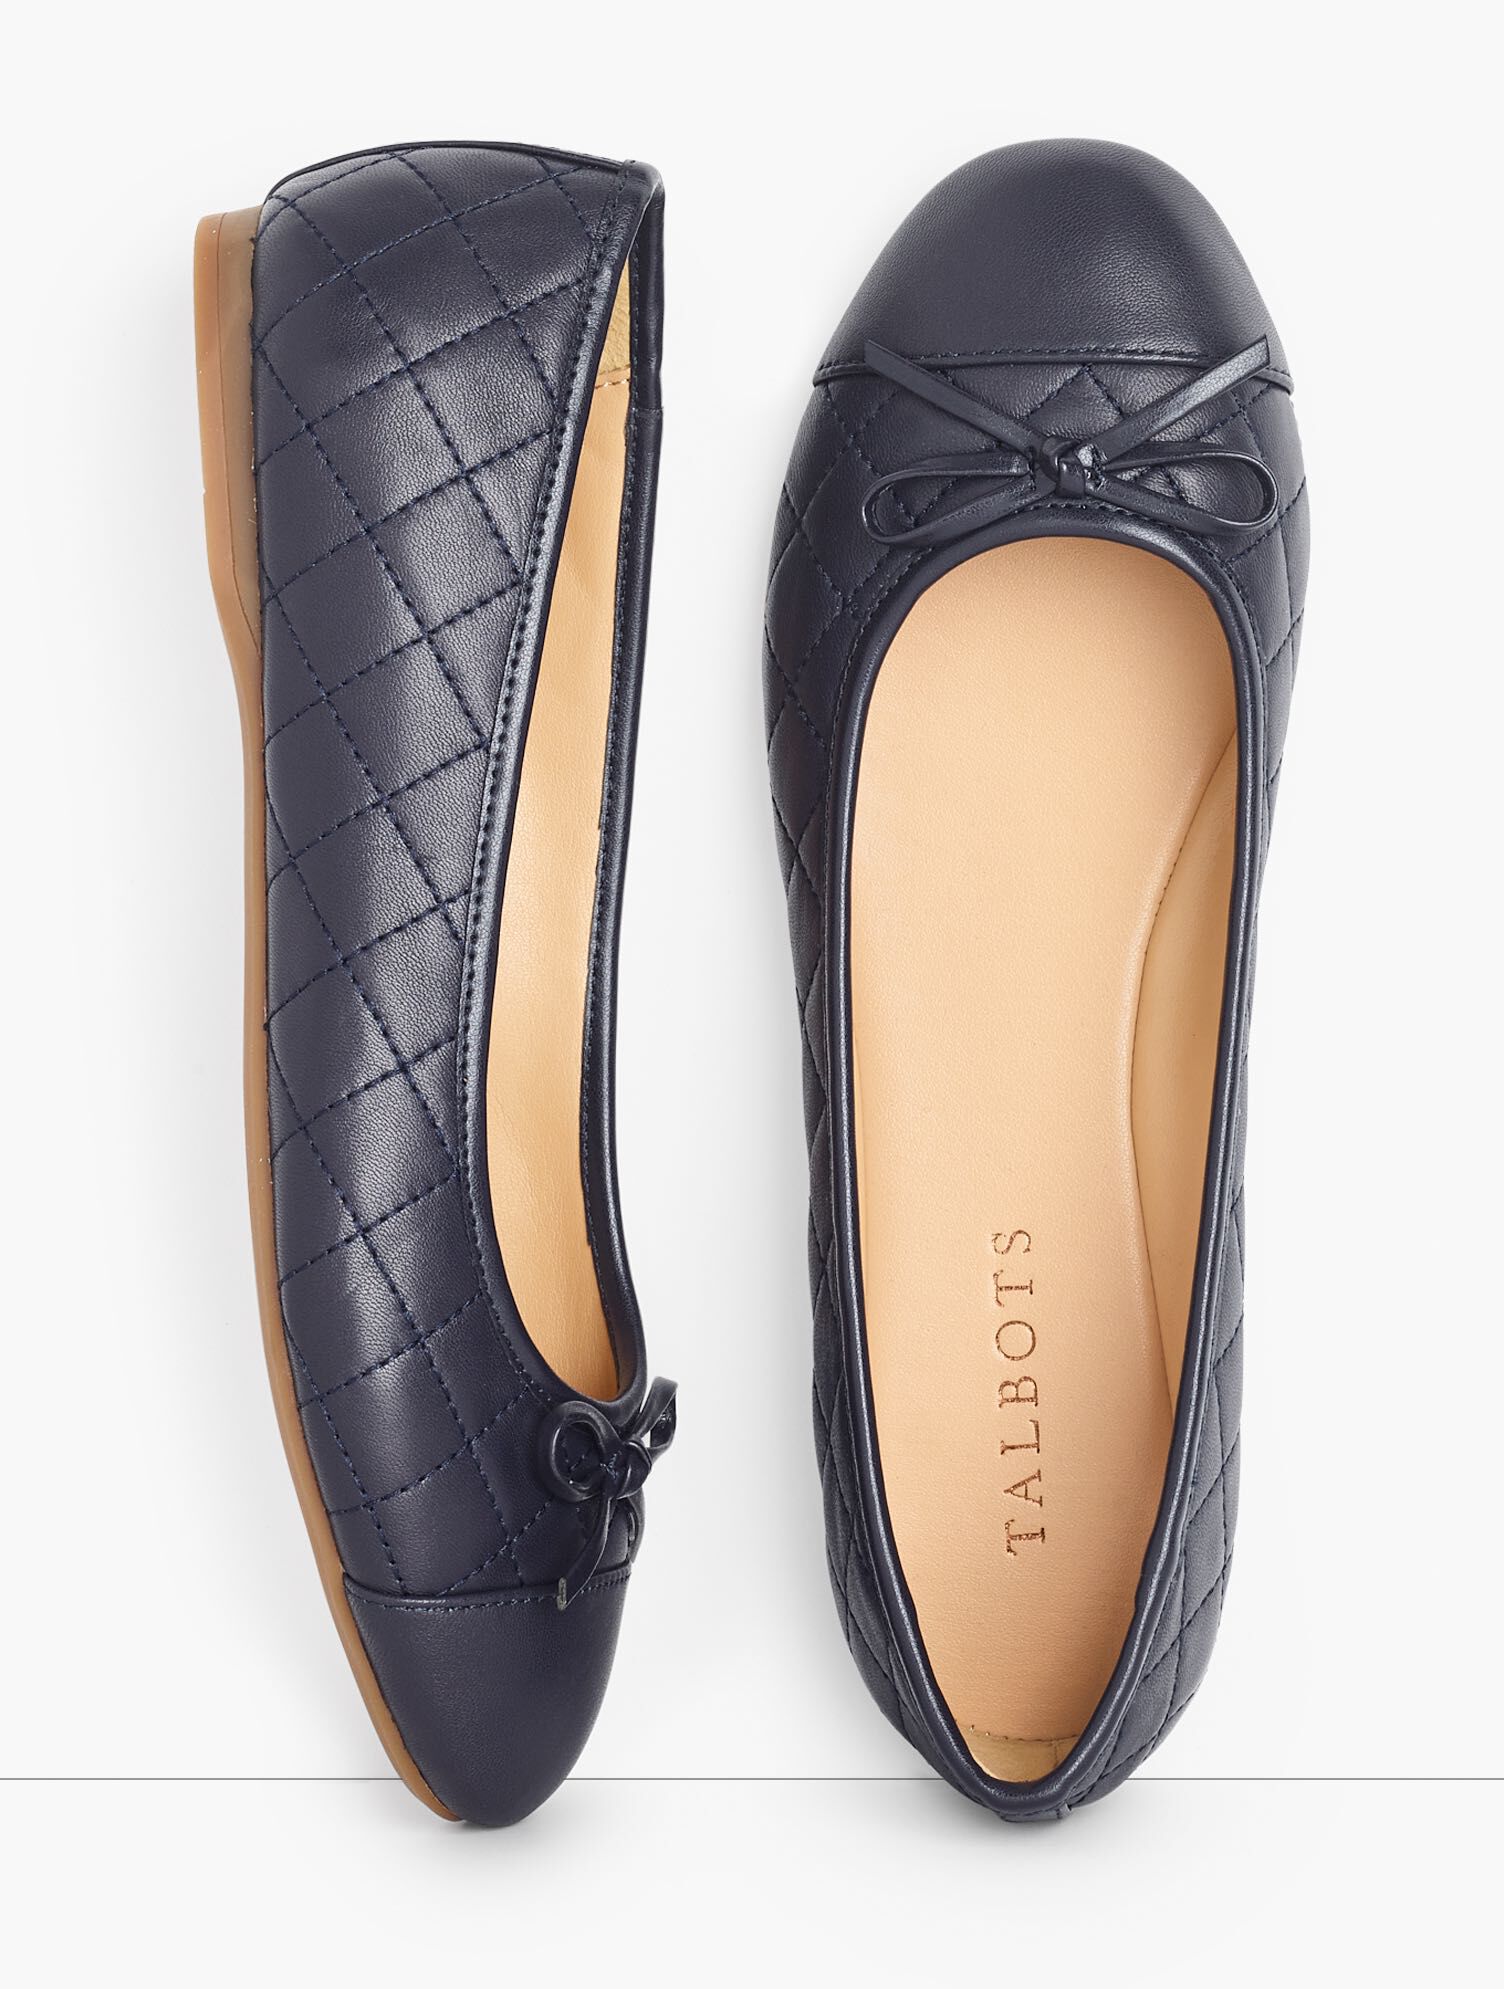 Penelope Cap Toe Ballet Flats - Quilted Nappa | Talbots